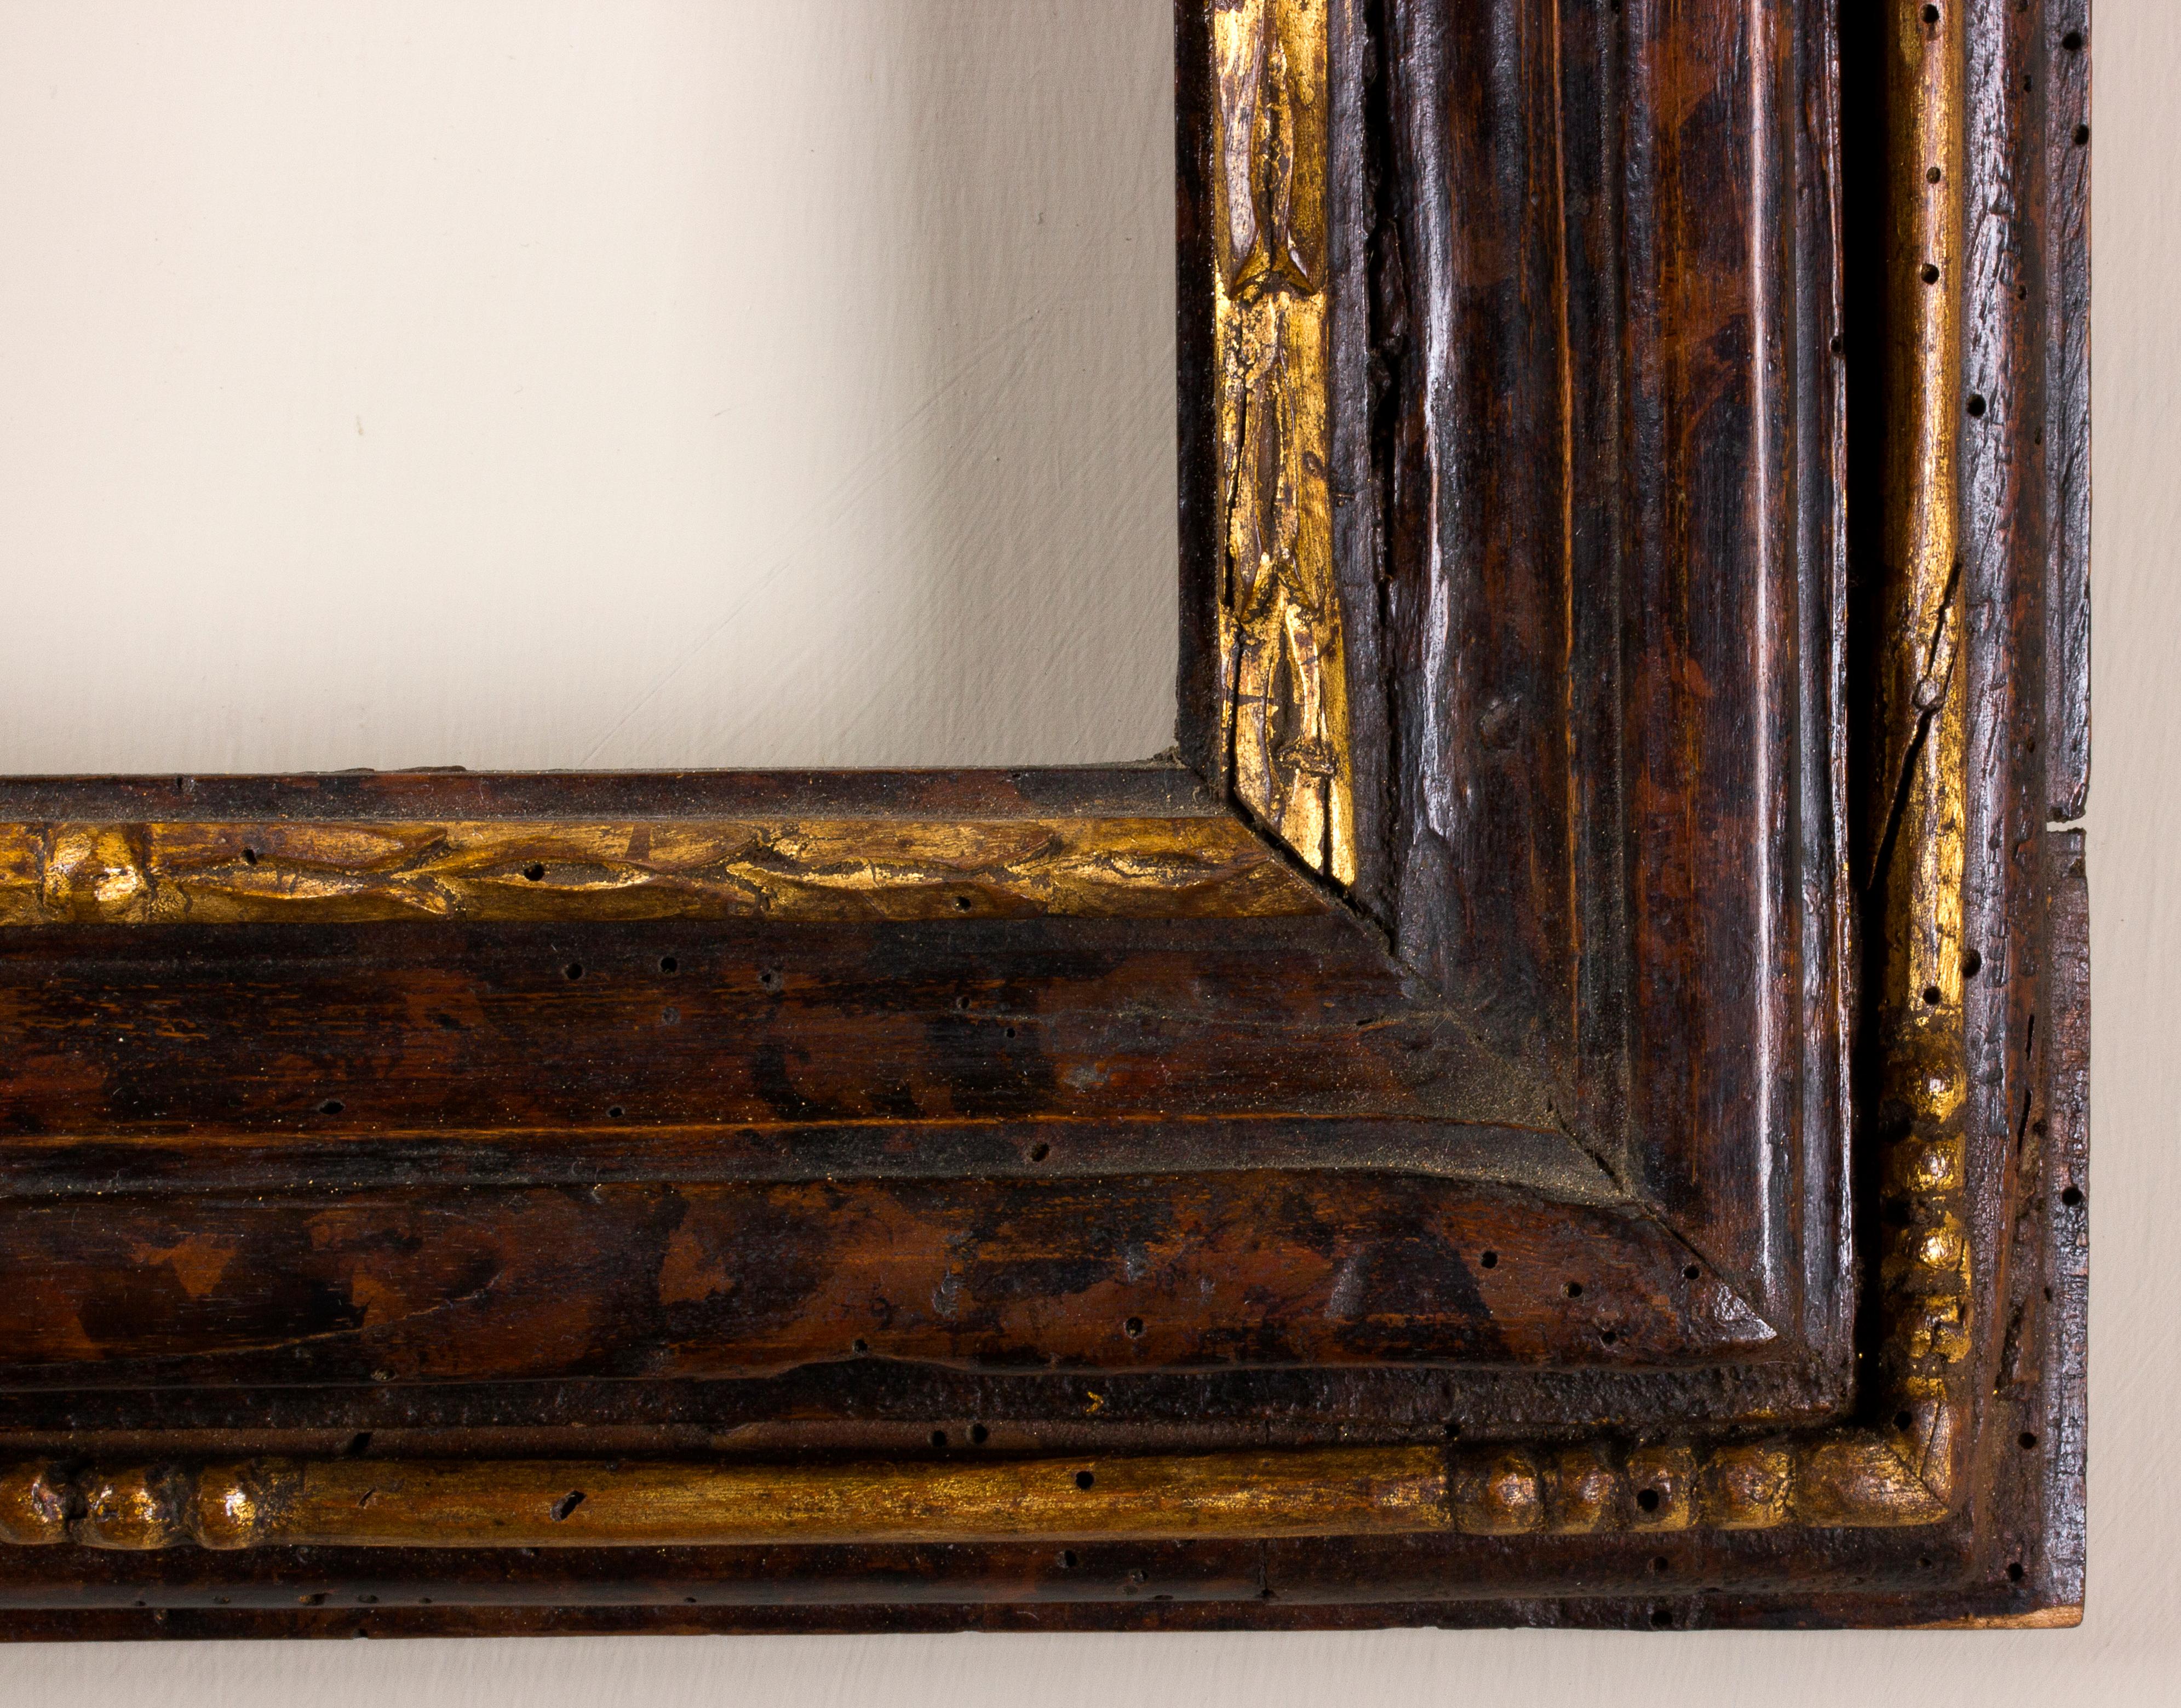 Central And Northern Italy frame, 18th century
Golden and faux-tortoiseshell painted wood decorated with recurring leaves motif.
Measures: Inside 27 x 21 cm; outside: 42 x 36.5 cm
Depth is the wide of the band.
 